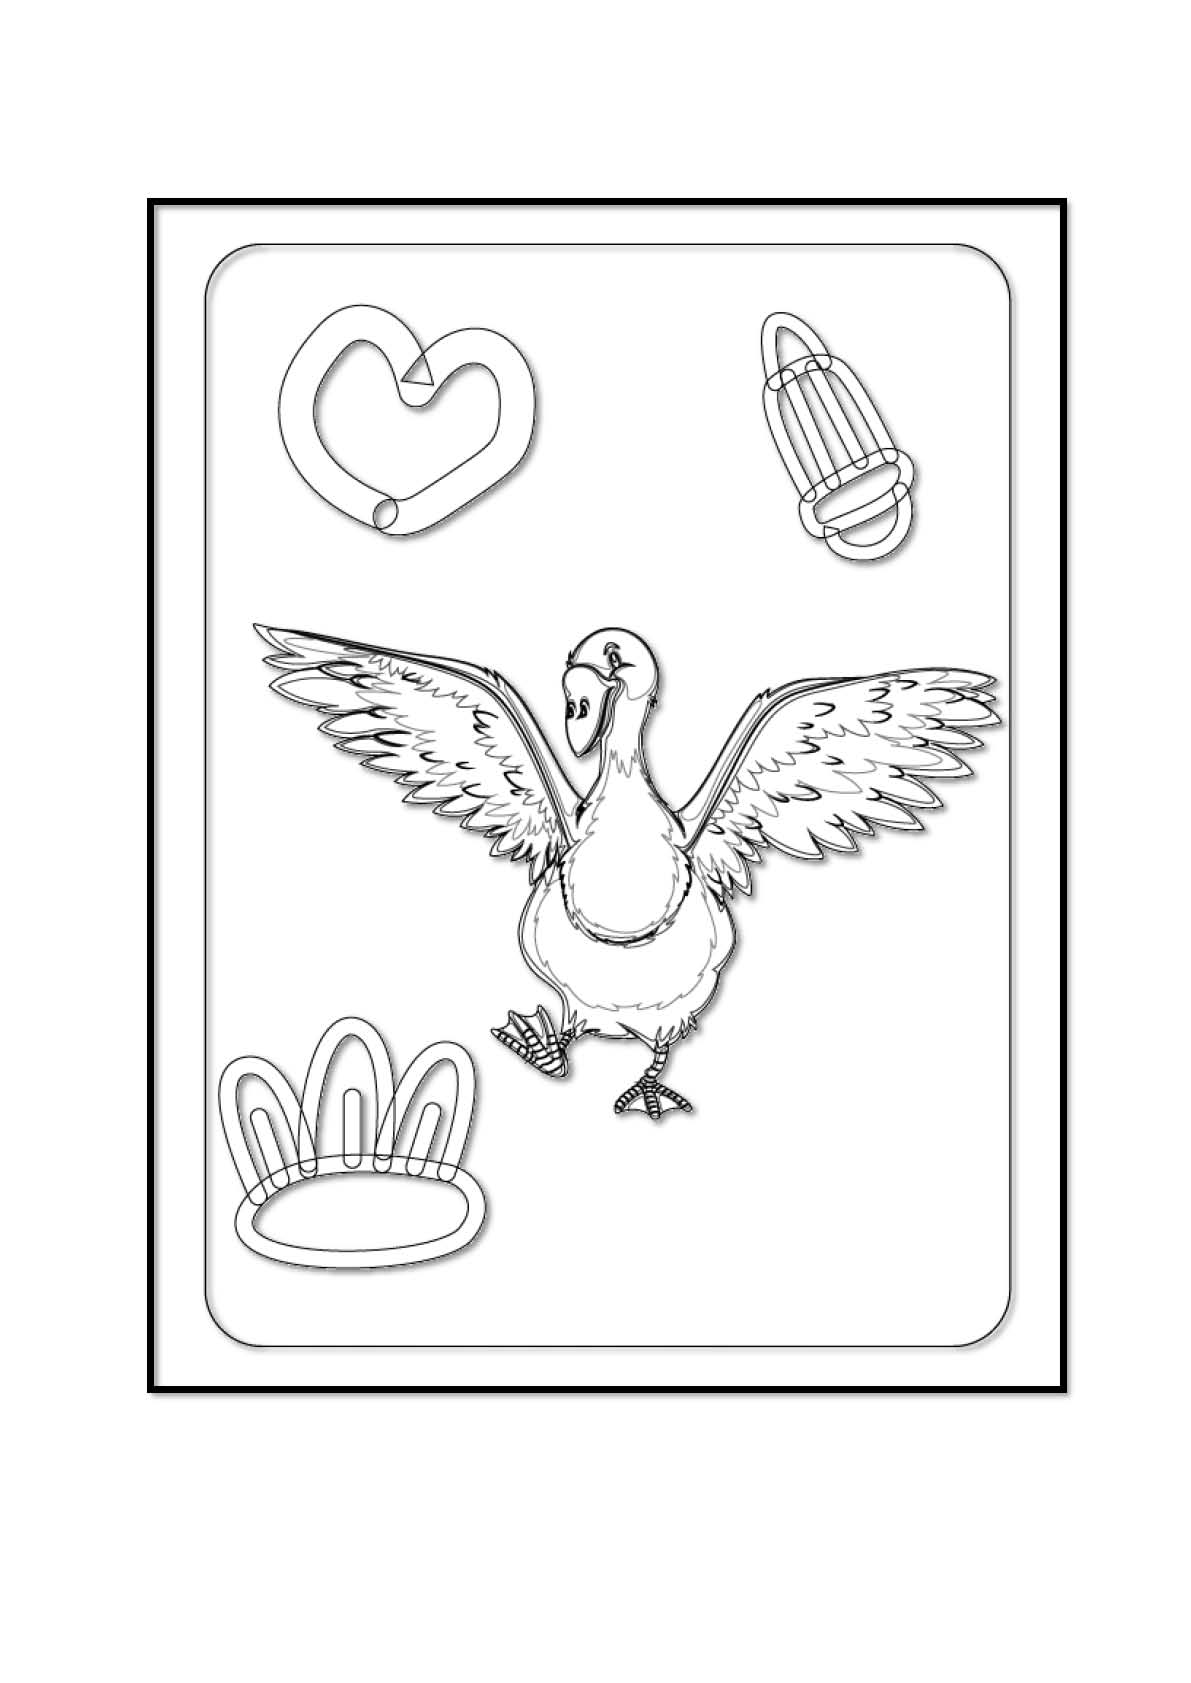 Cute ducks coloring book for kids cute and simple duck coloring pages for child made by teachers